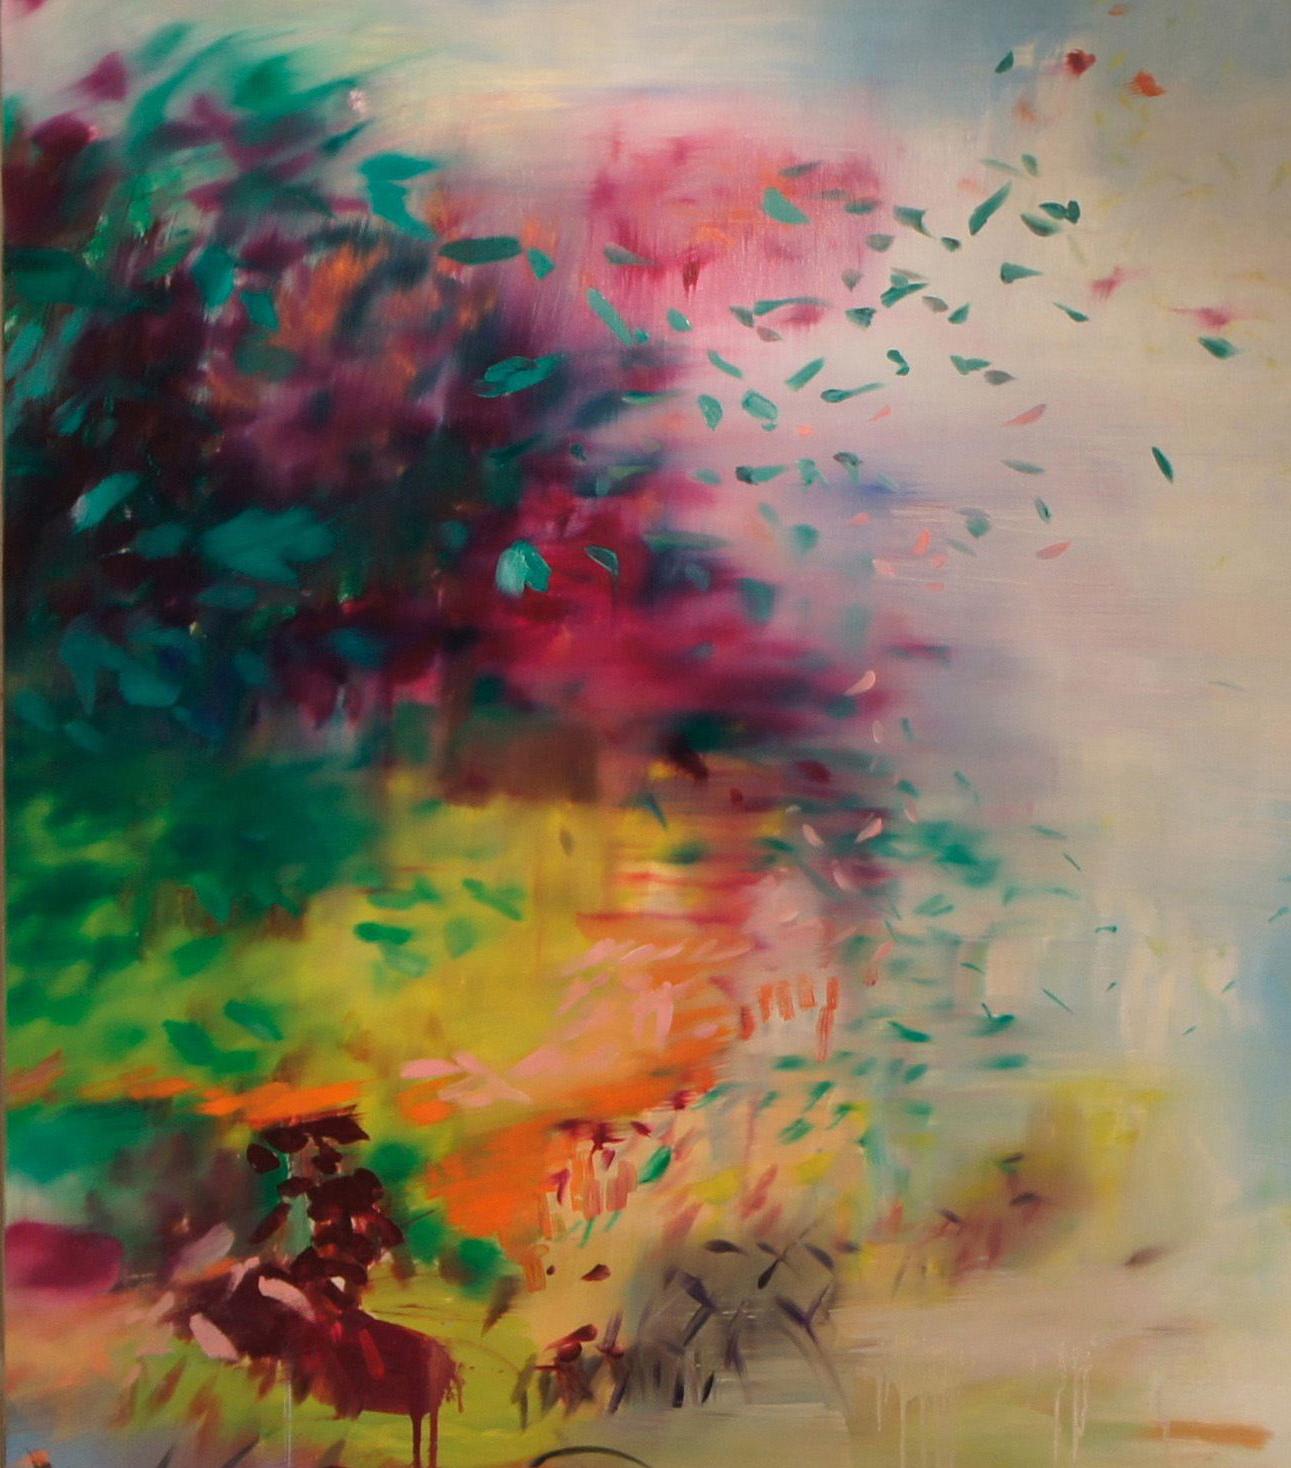 Angelina Nasso, Happiness, Oil on Canvas, 2014 2